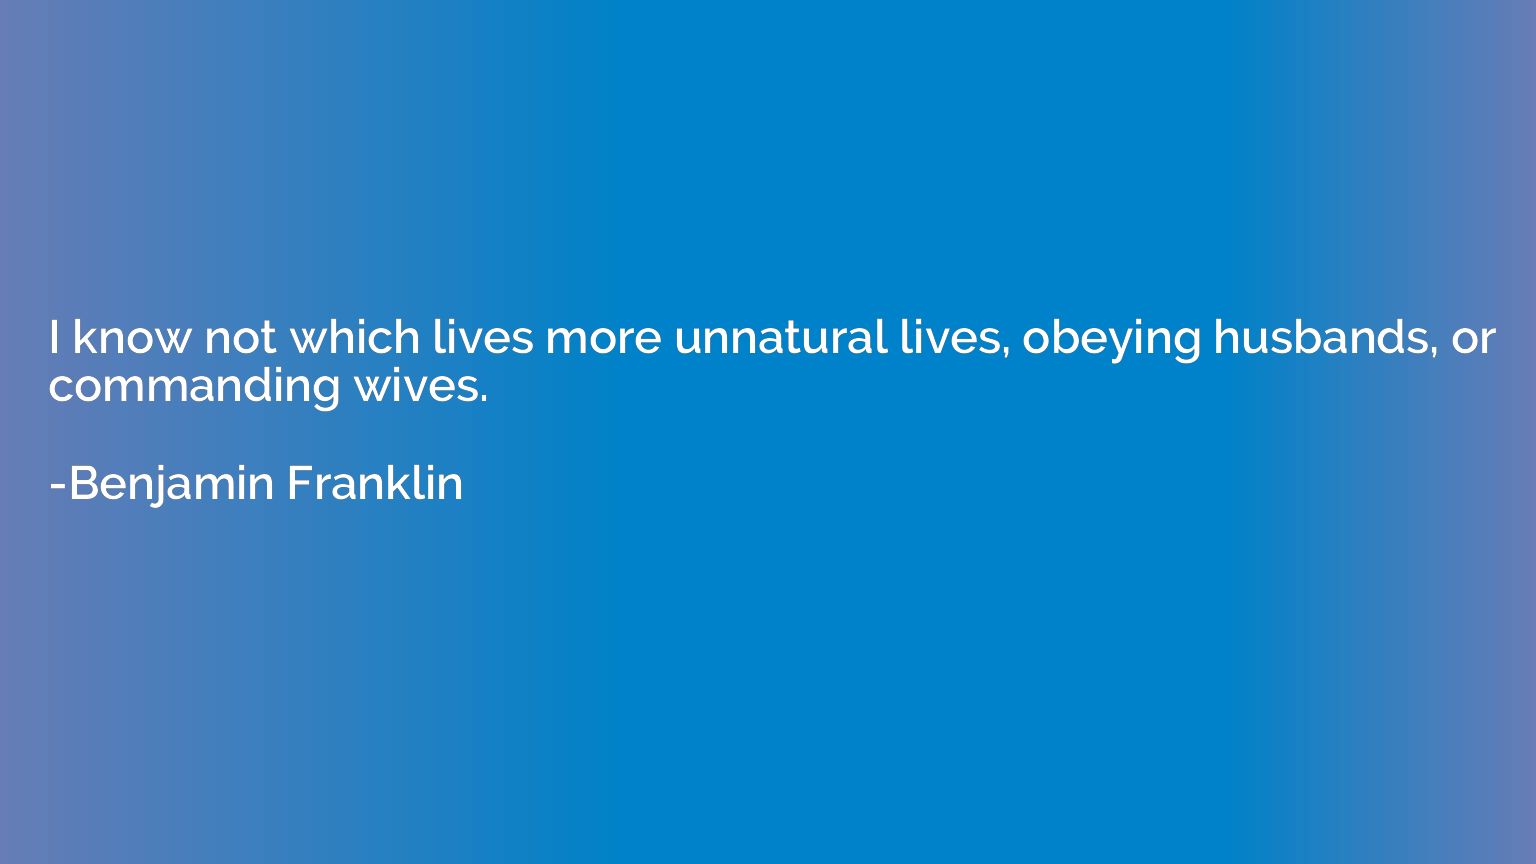 I know not which lives more unnatural lives, obeying husband